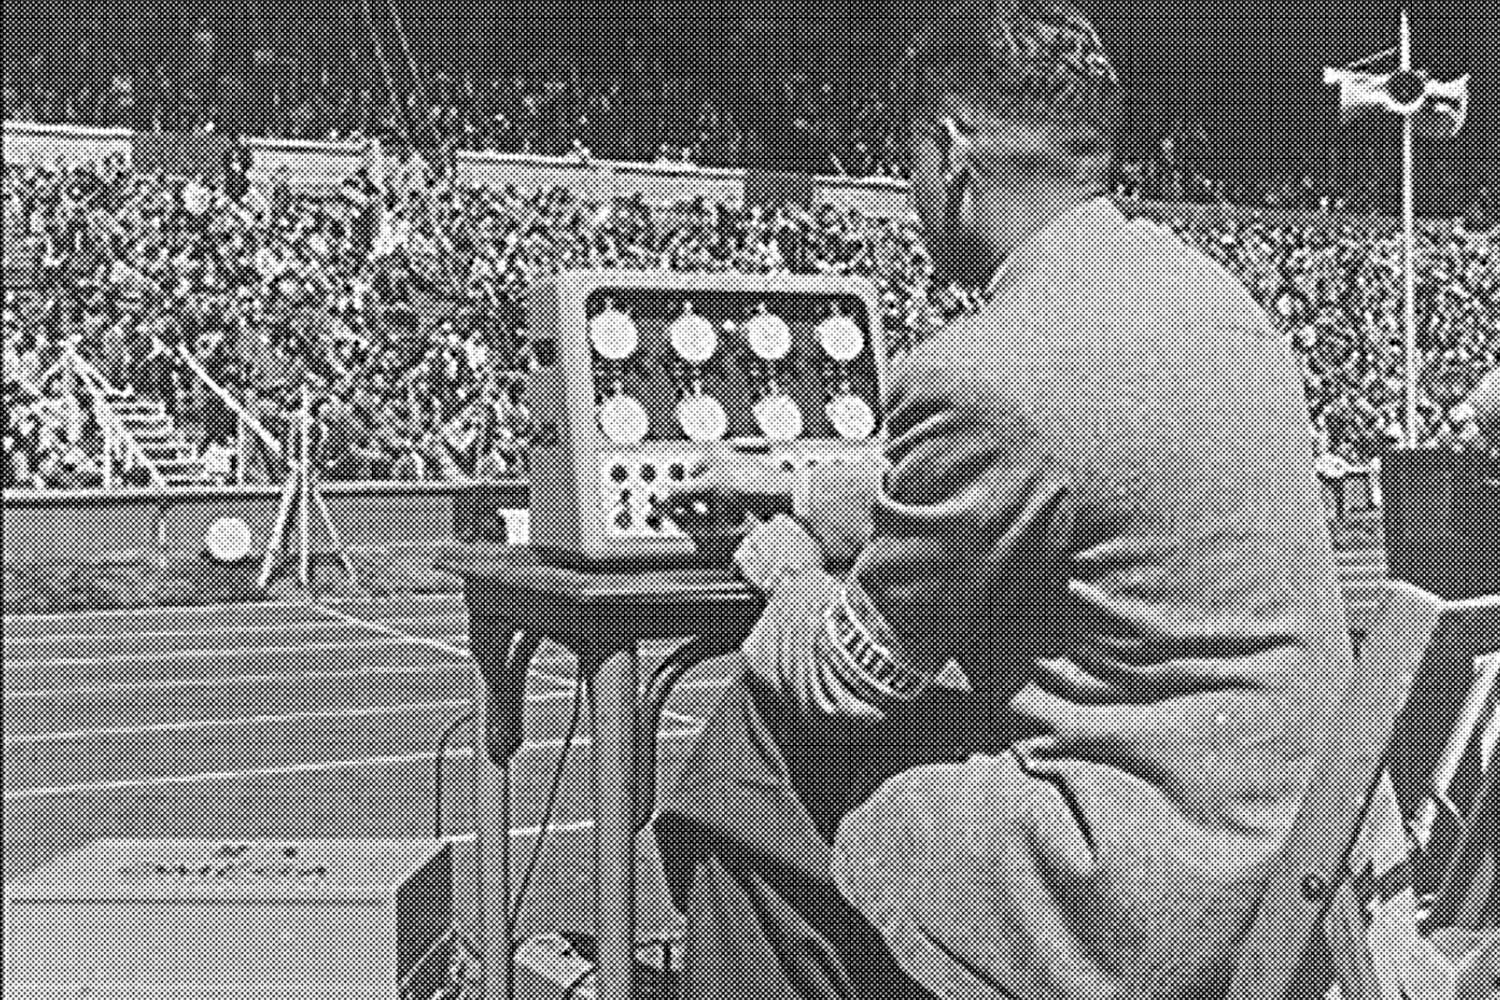 During 1932 LA Olympics, a timing board with eight Omega split-seconds pocket chronographs that was used to time track & field events